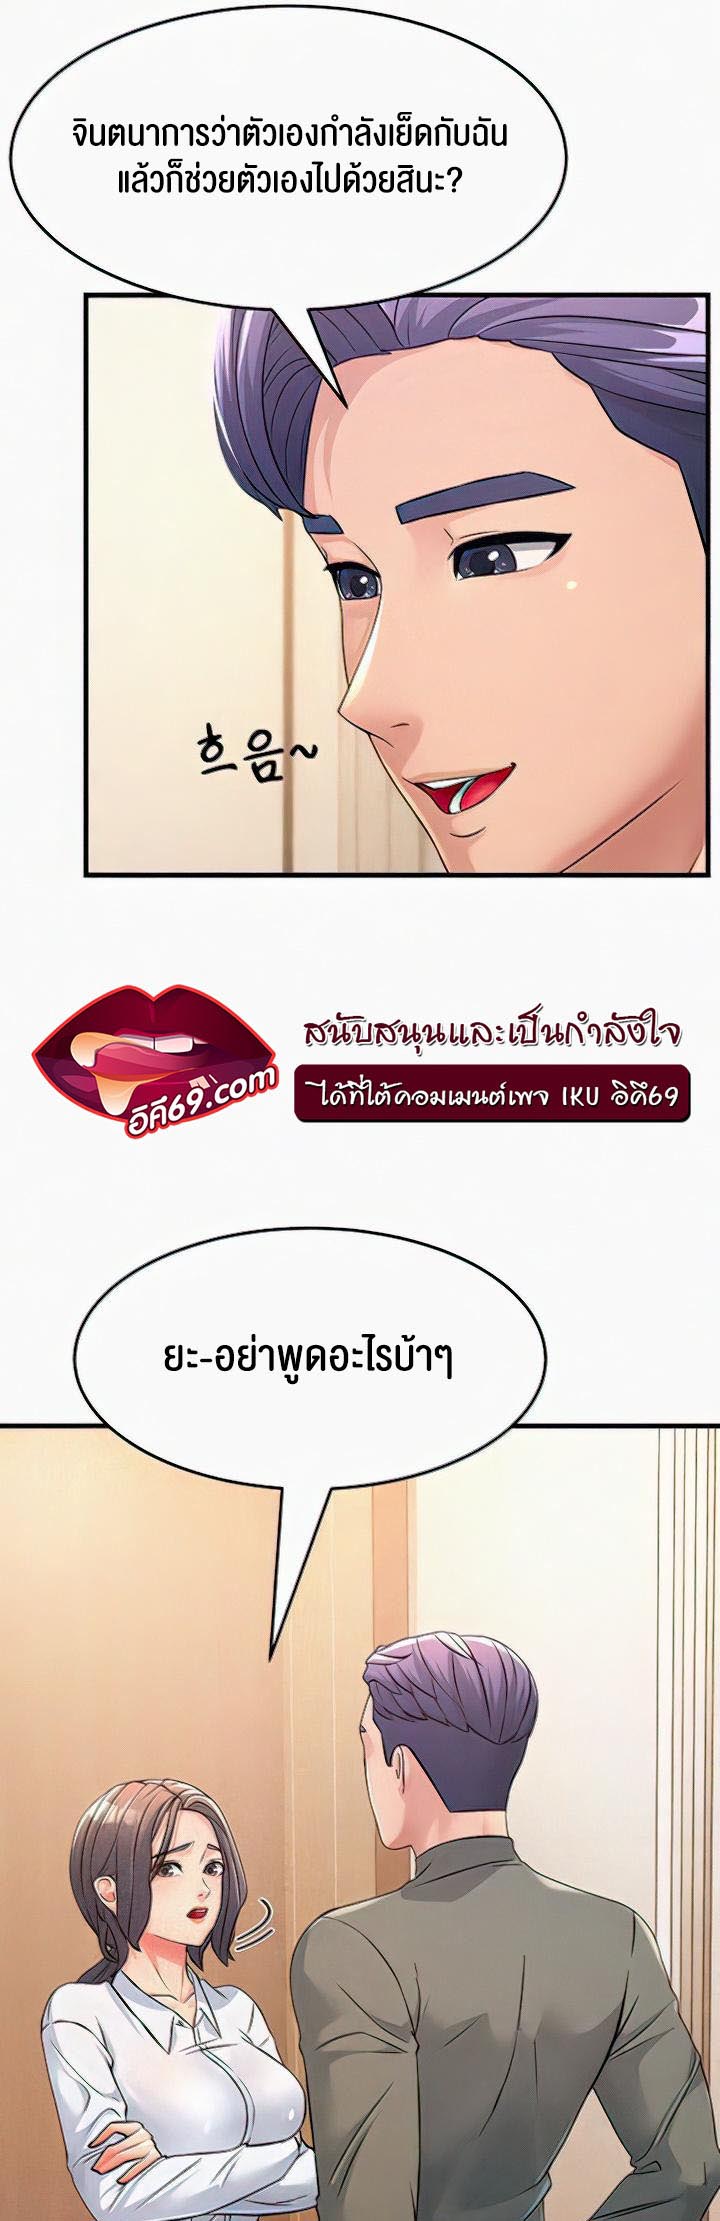 à¸­à¹ˆà¸²à¸™à¹‚à¸”à¸ˆà¸´à¸™ à¹€à¸£à¸·à¹ˆà¸­à¸‡ Mother in Law Bends To My Will 4 41